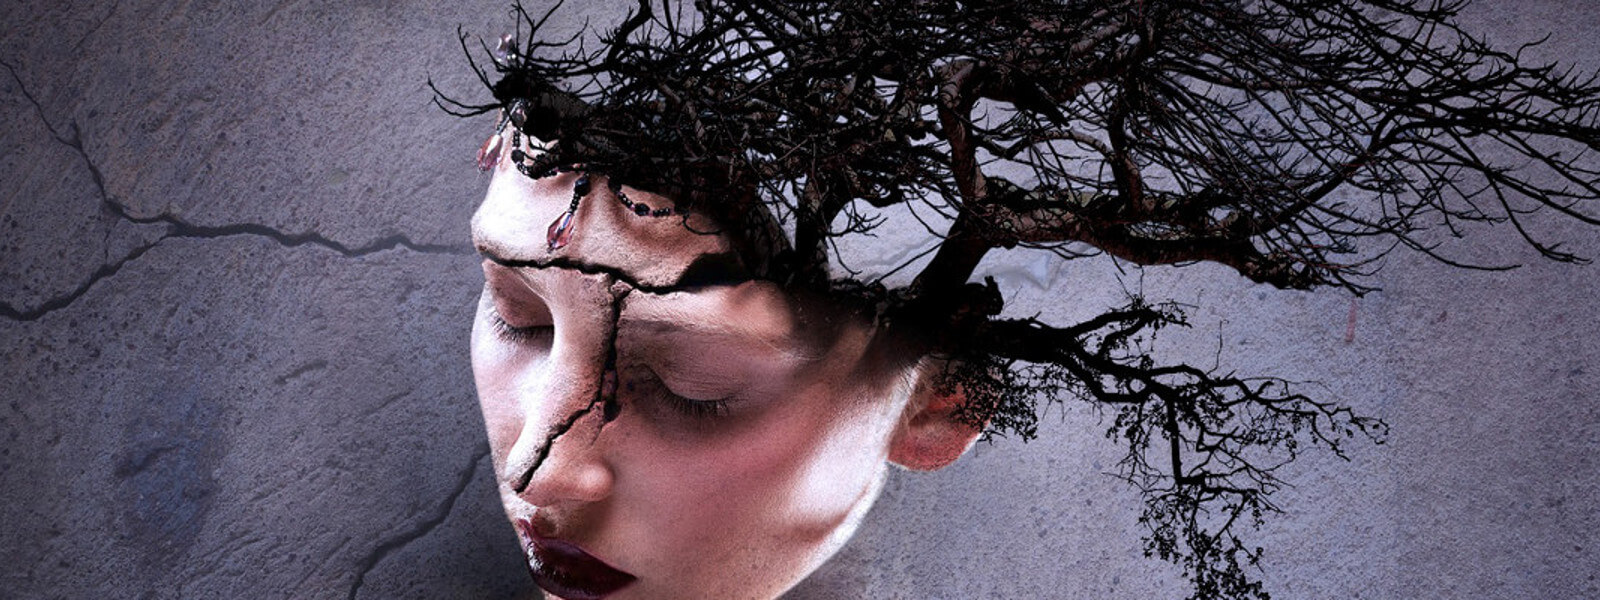 An artistic depiction of a tree growing out of a woman's head.